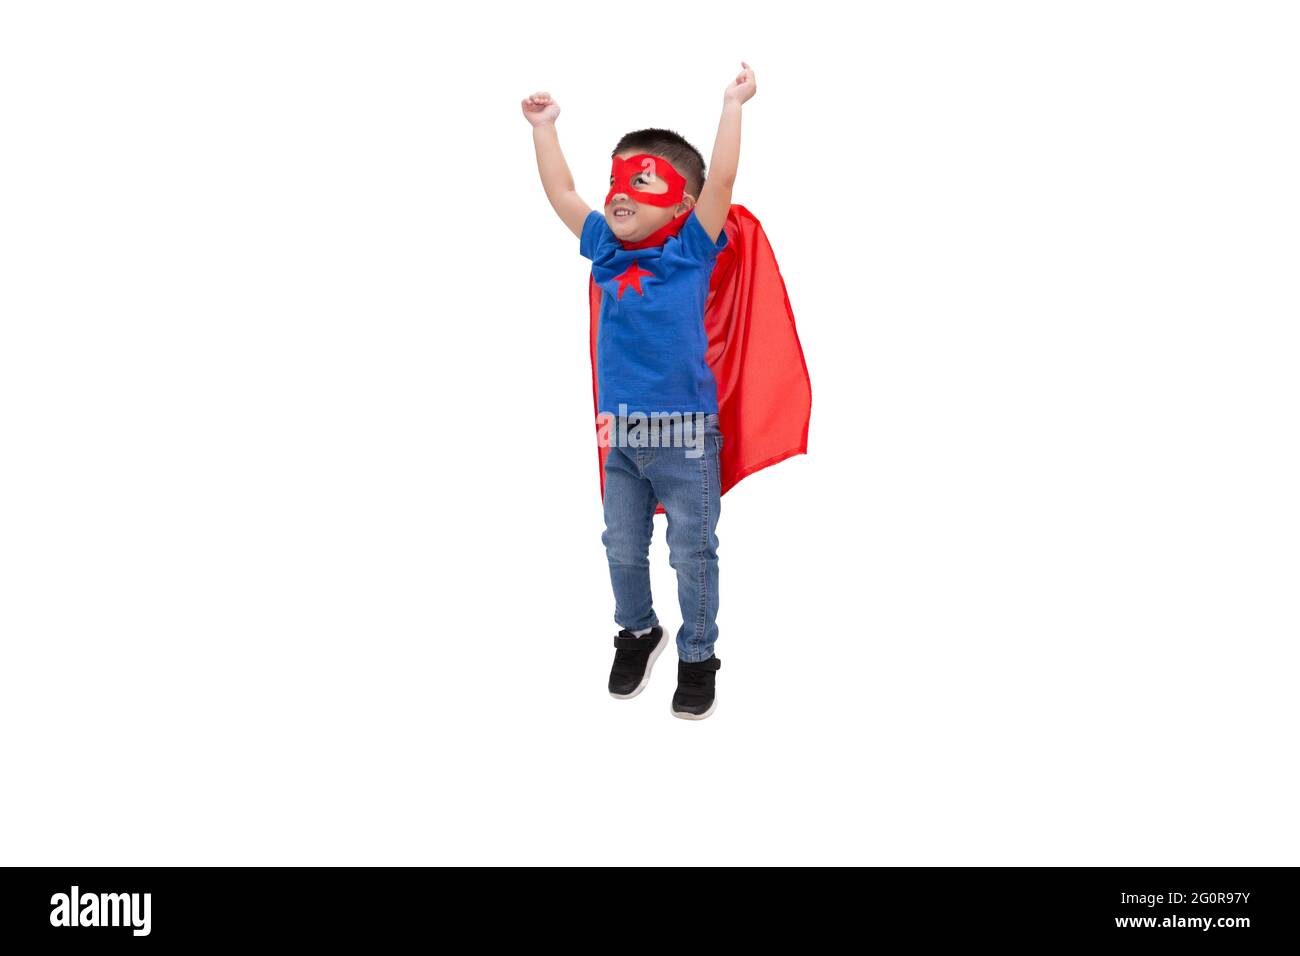 Asian boy jumping with funny little power of hero isolated on white background, Superhero concept Stock Photo